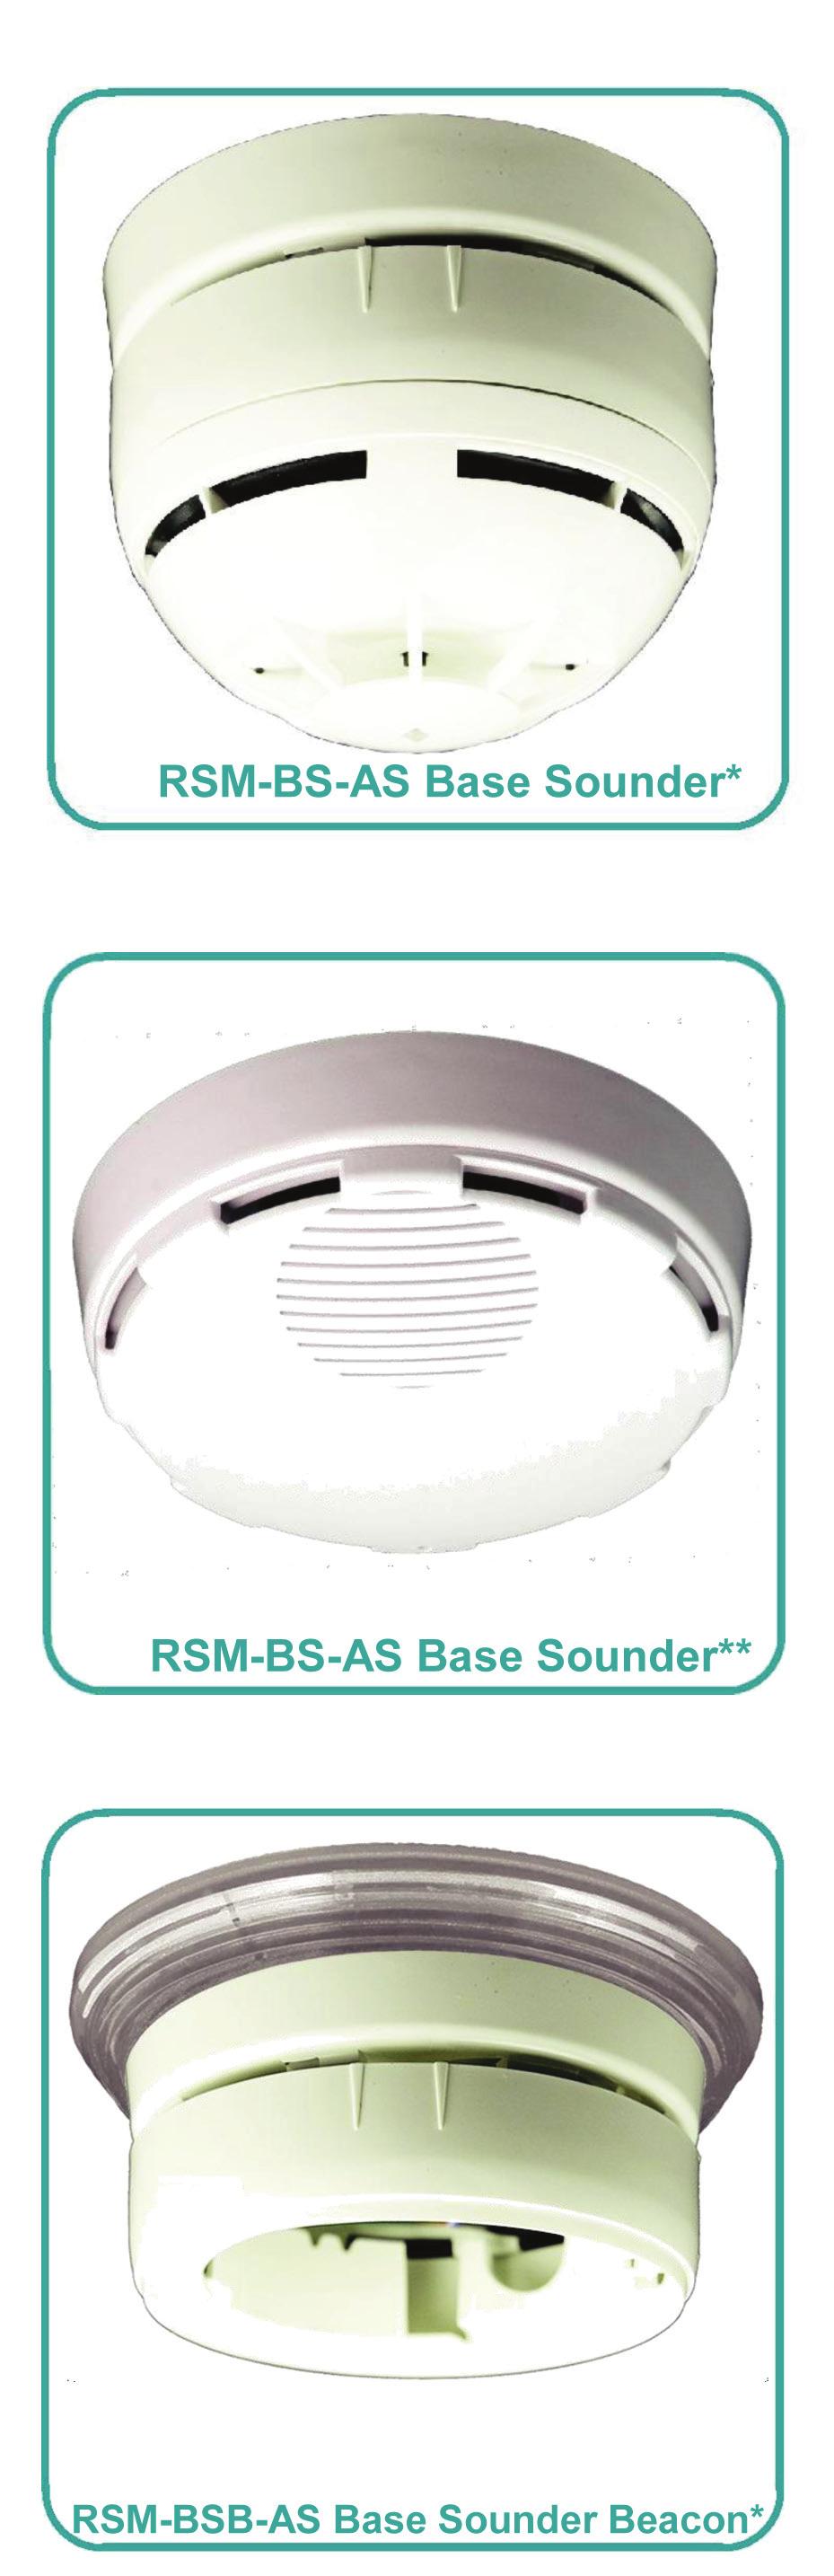 Wireless audio/visual Audio/Visual The FIREwave base mounted Audio Visual devices provide a visually attractive and cost effective solution for a wide variety of wireless installation types and sizes.